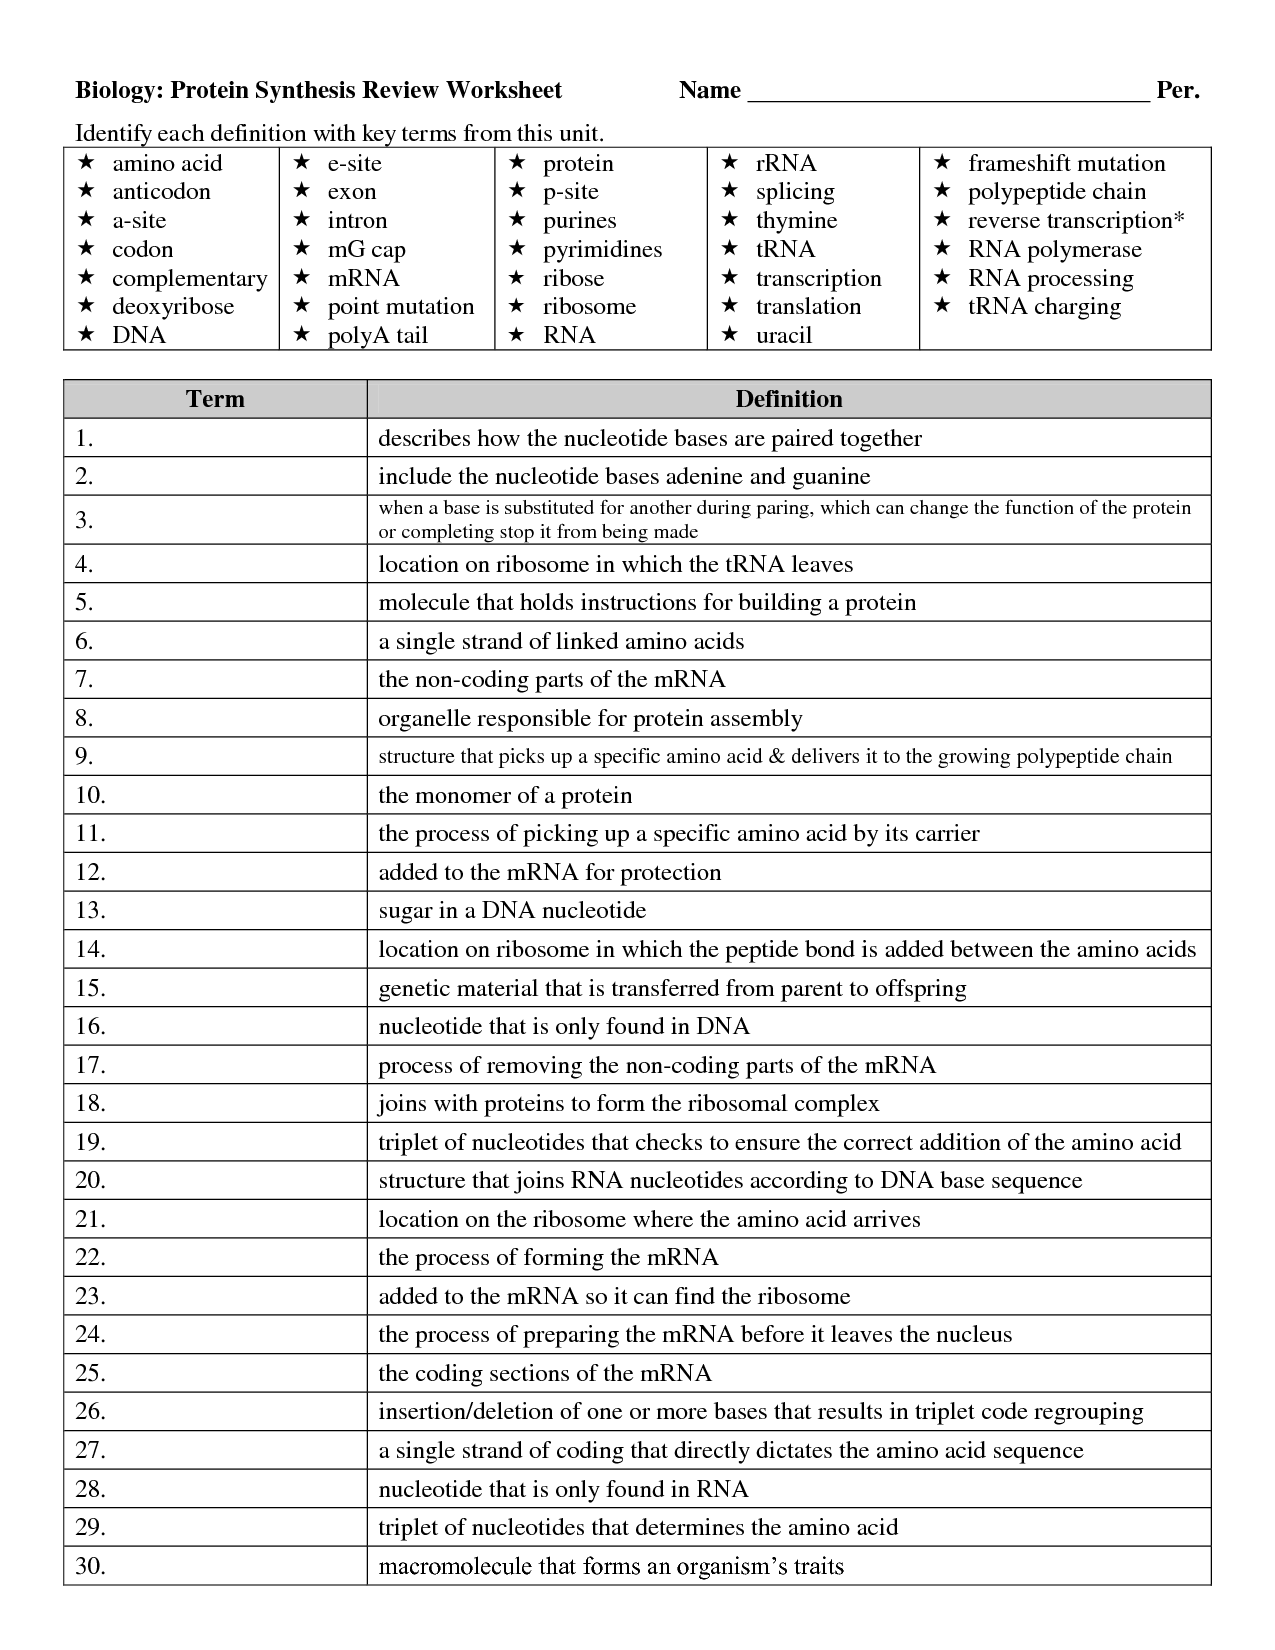 17-best-images-of-protein-function-worksheets-dna-protein-synthesis-worksheet-answers-protein